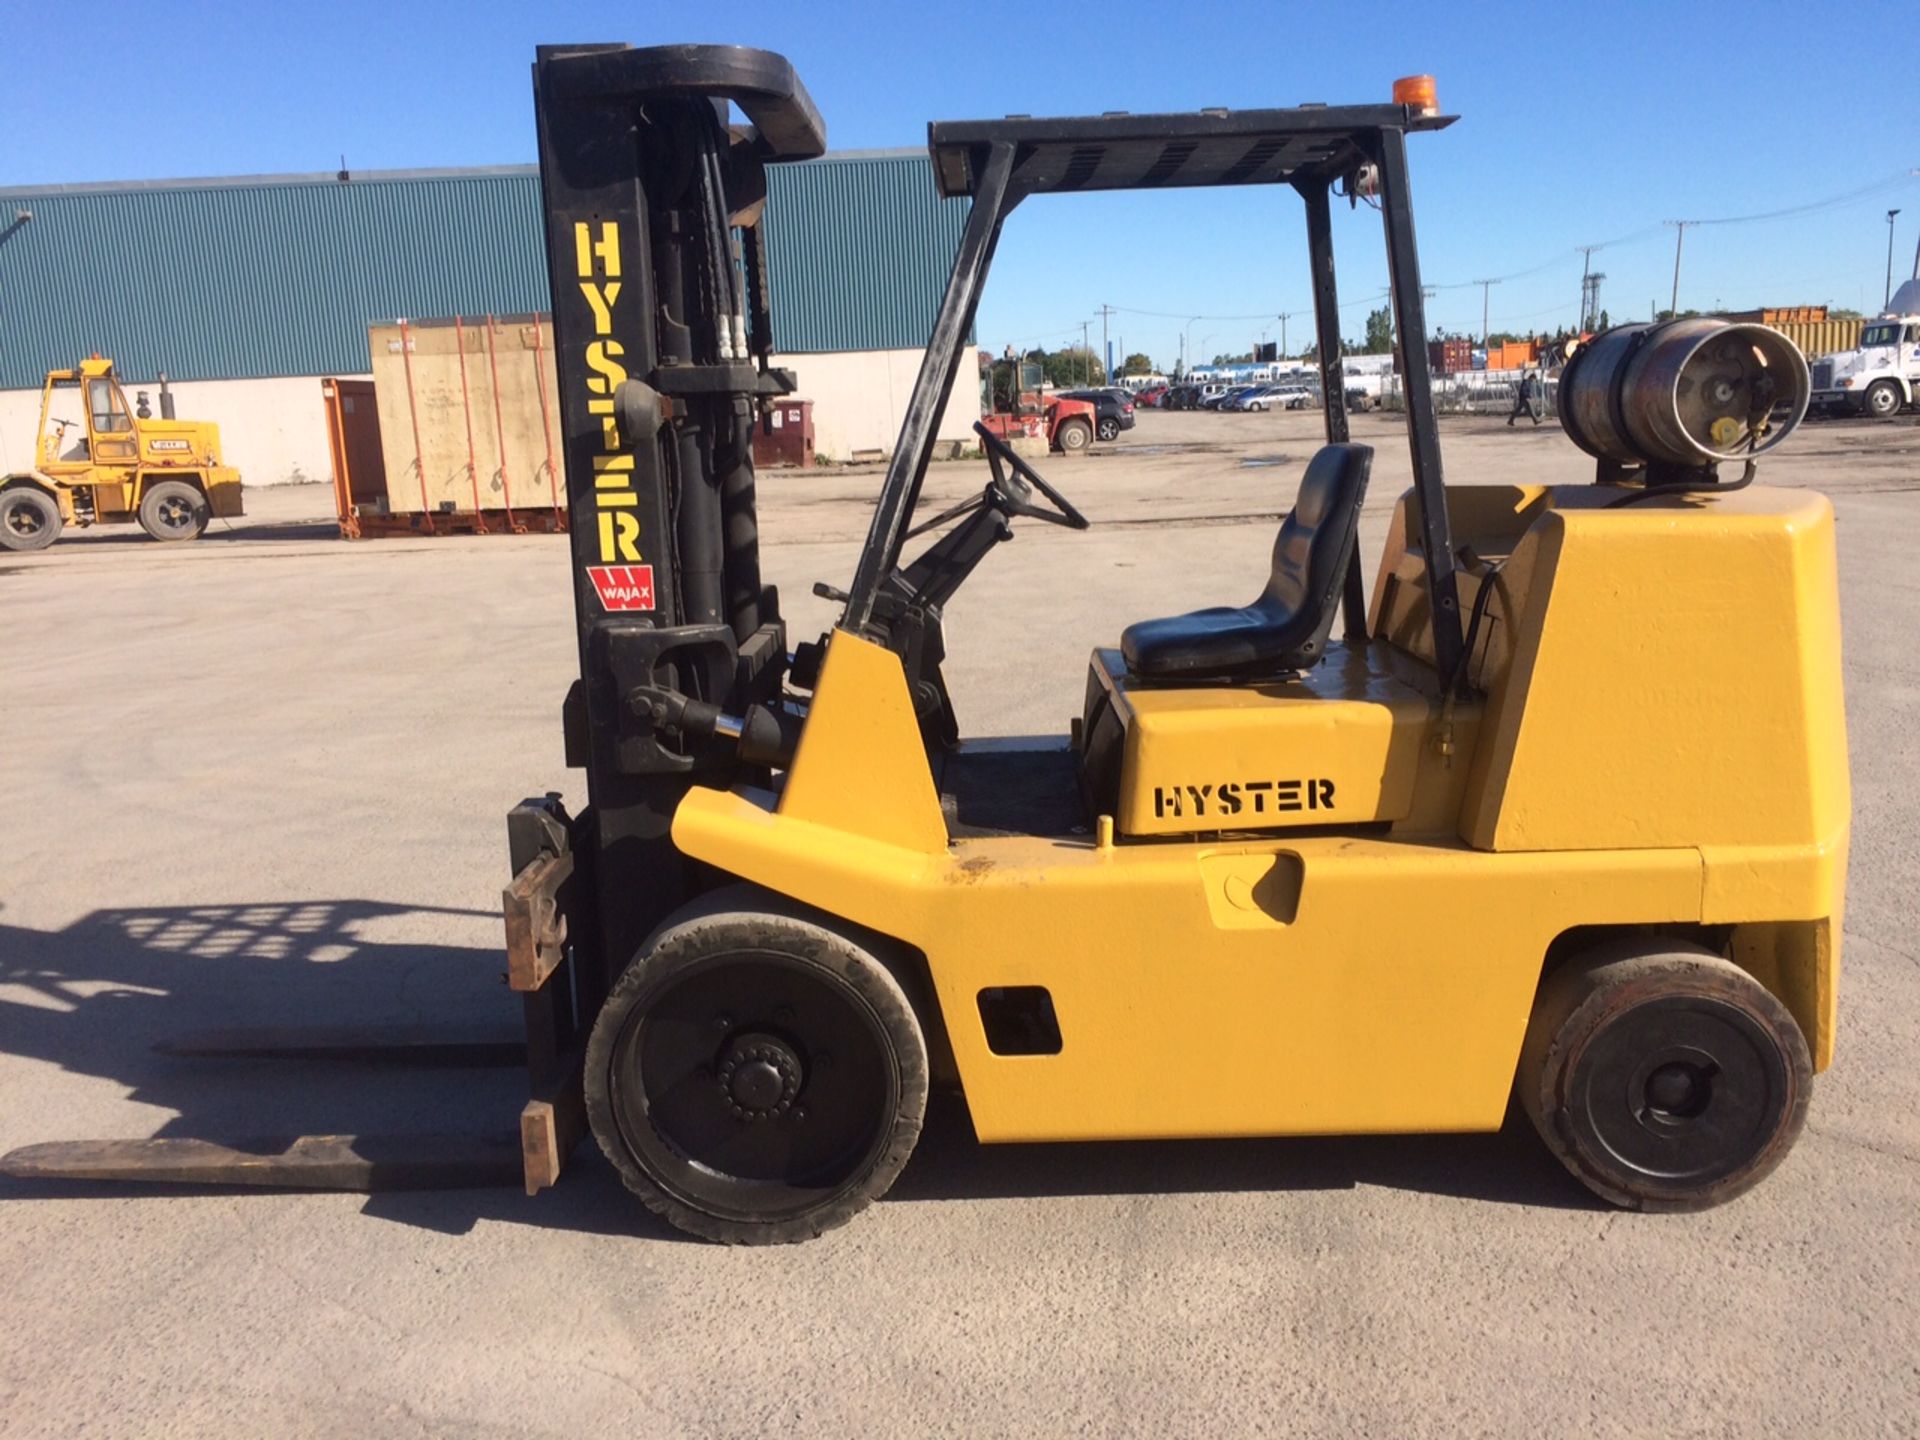 HYSTER 15 000 LBS PROPANE FORKLIFT MOD. S155XL, 161" HEIGHT, 3286 HOURS, S/N: B024D04082T